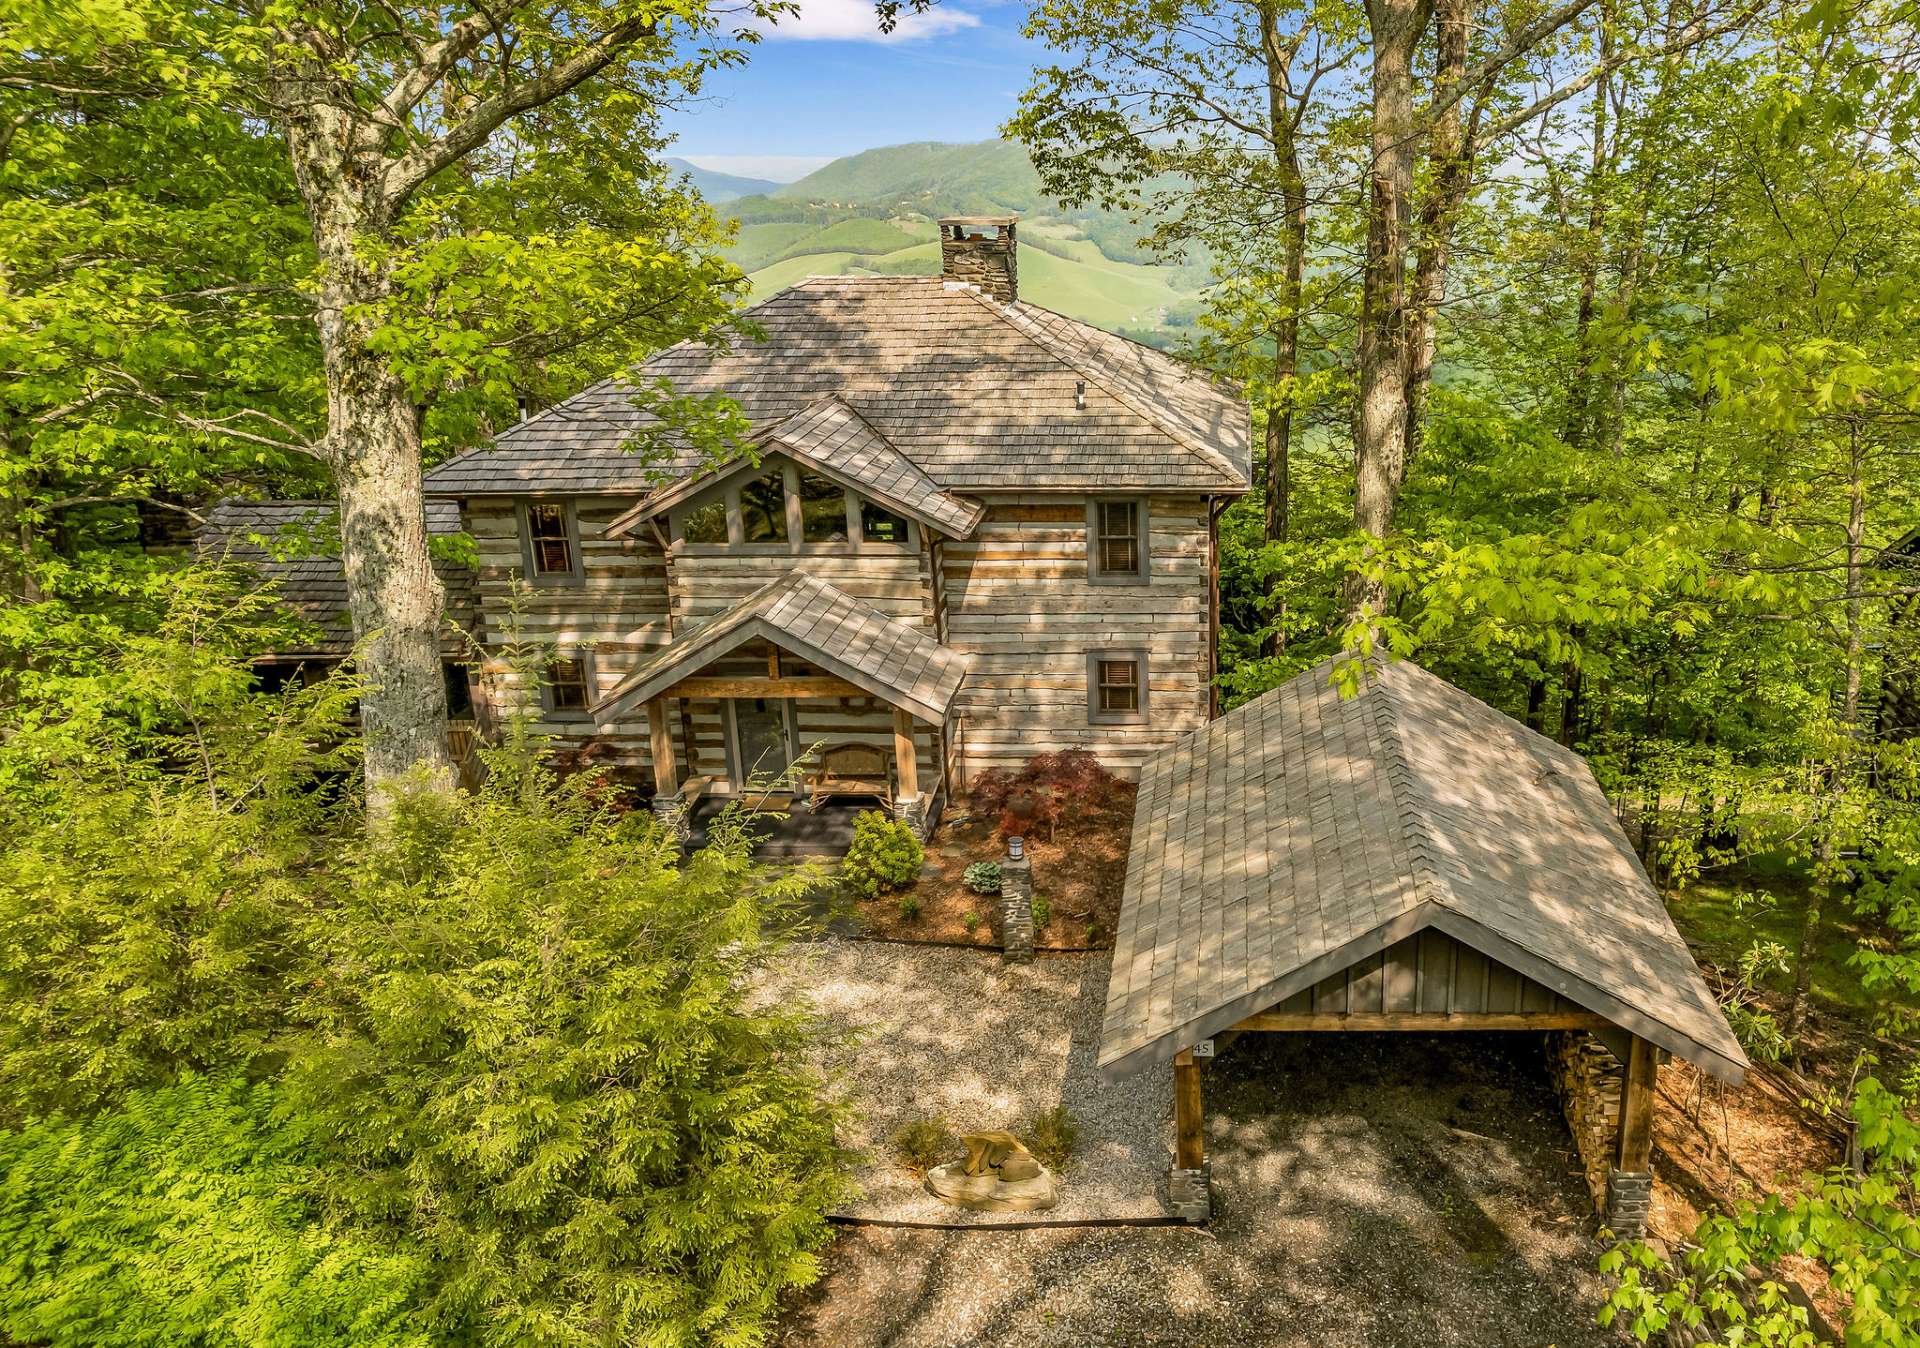 Welcome to your NC High Country Mountain home!